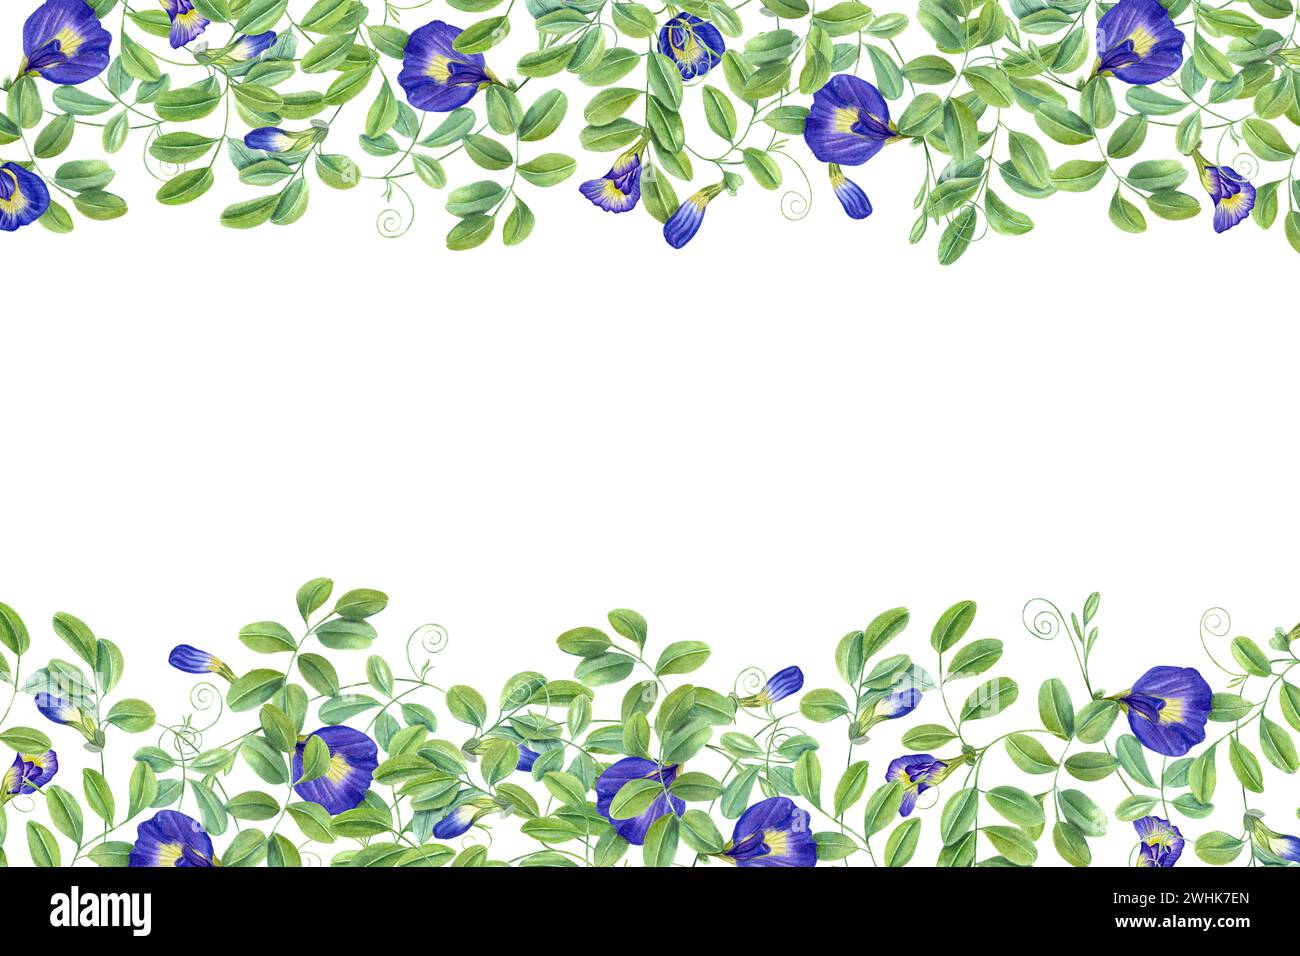 Tropical plant, Ipomoea, clitoria ternatea, bluebellvine. Thai blue flowers. Horizontal frame with text space. Butterfly pea flowers. Stock Photo